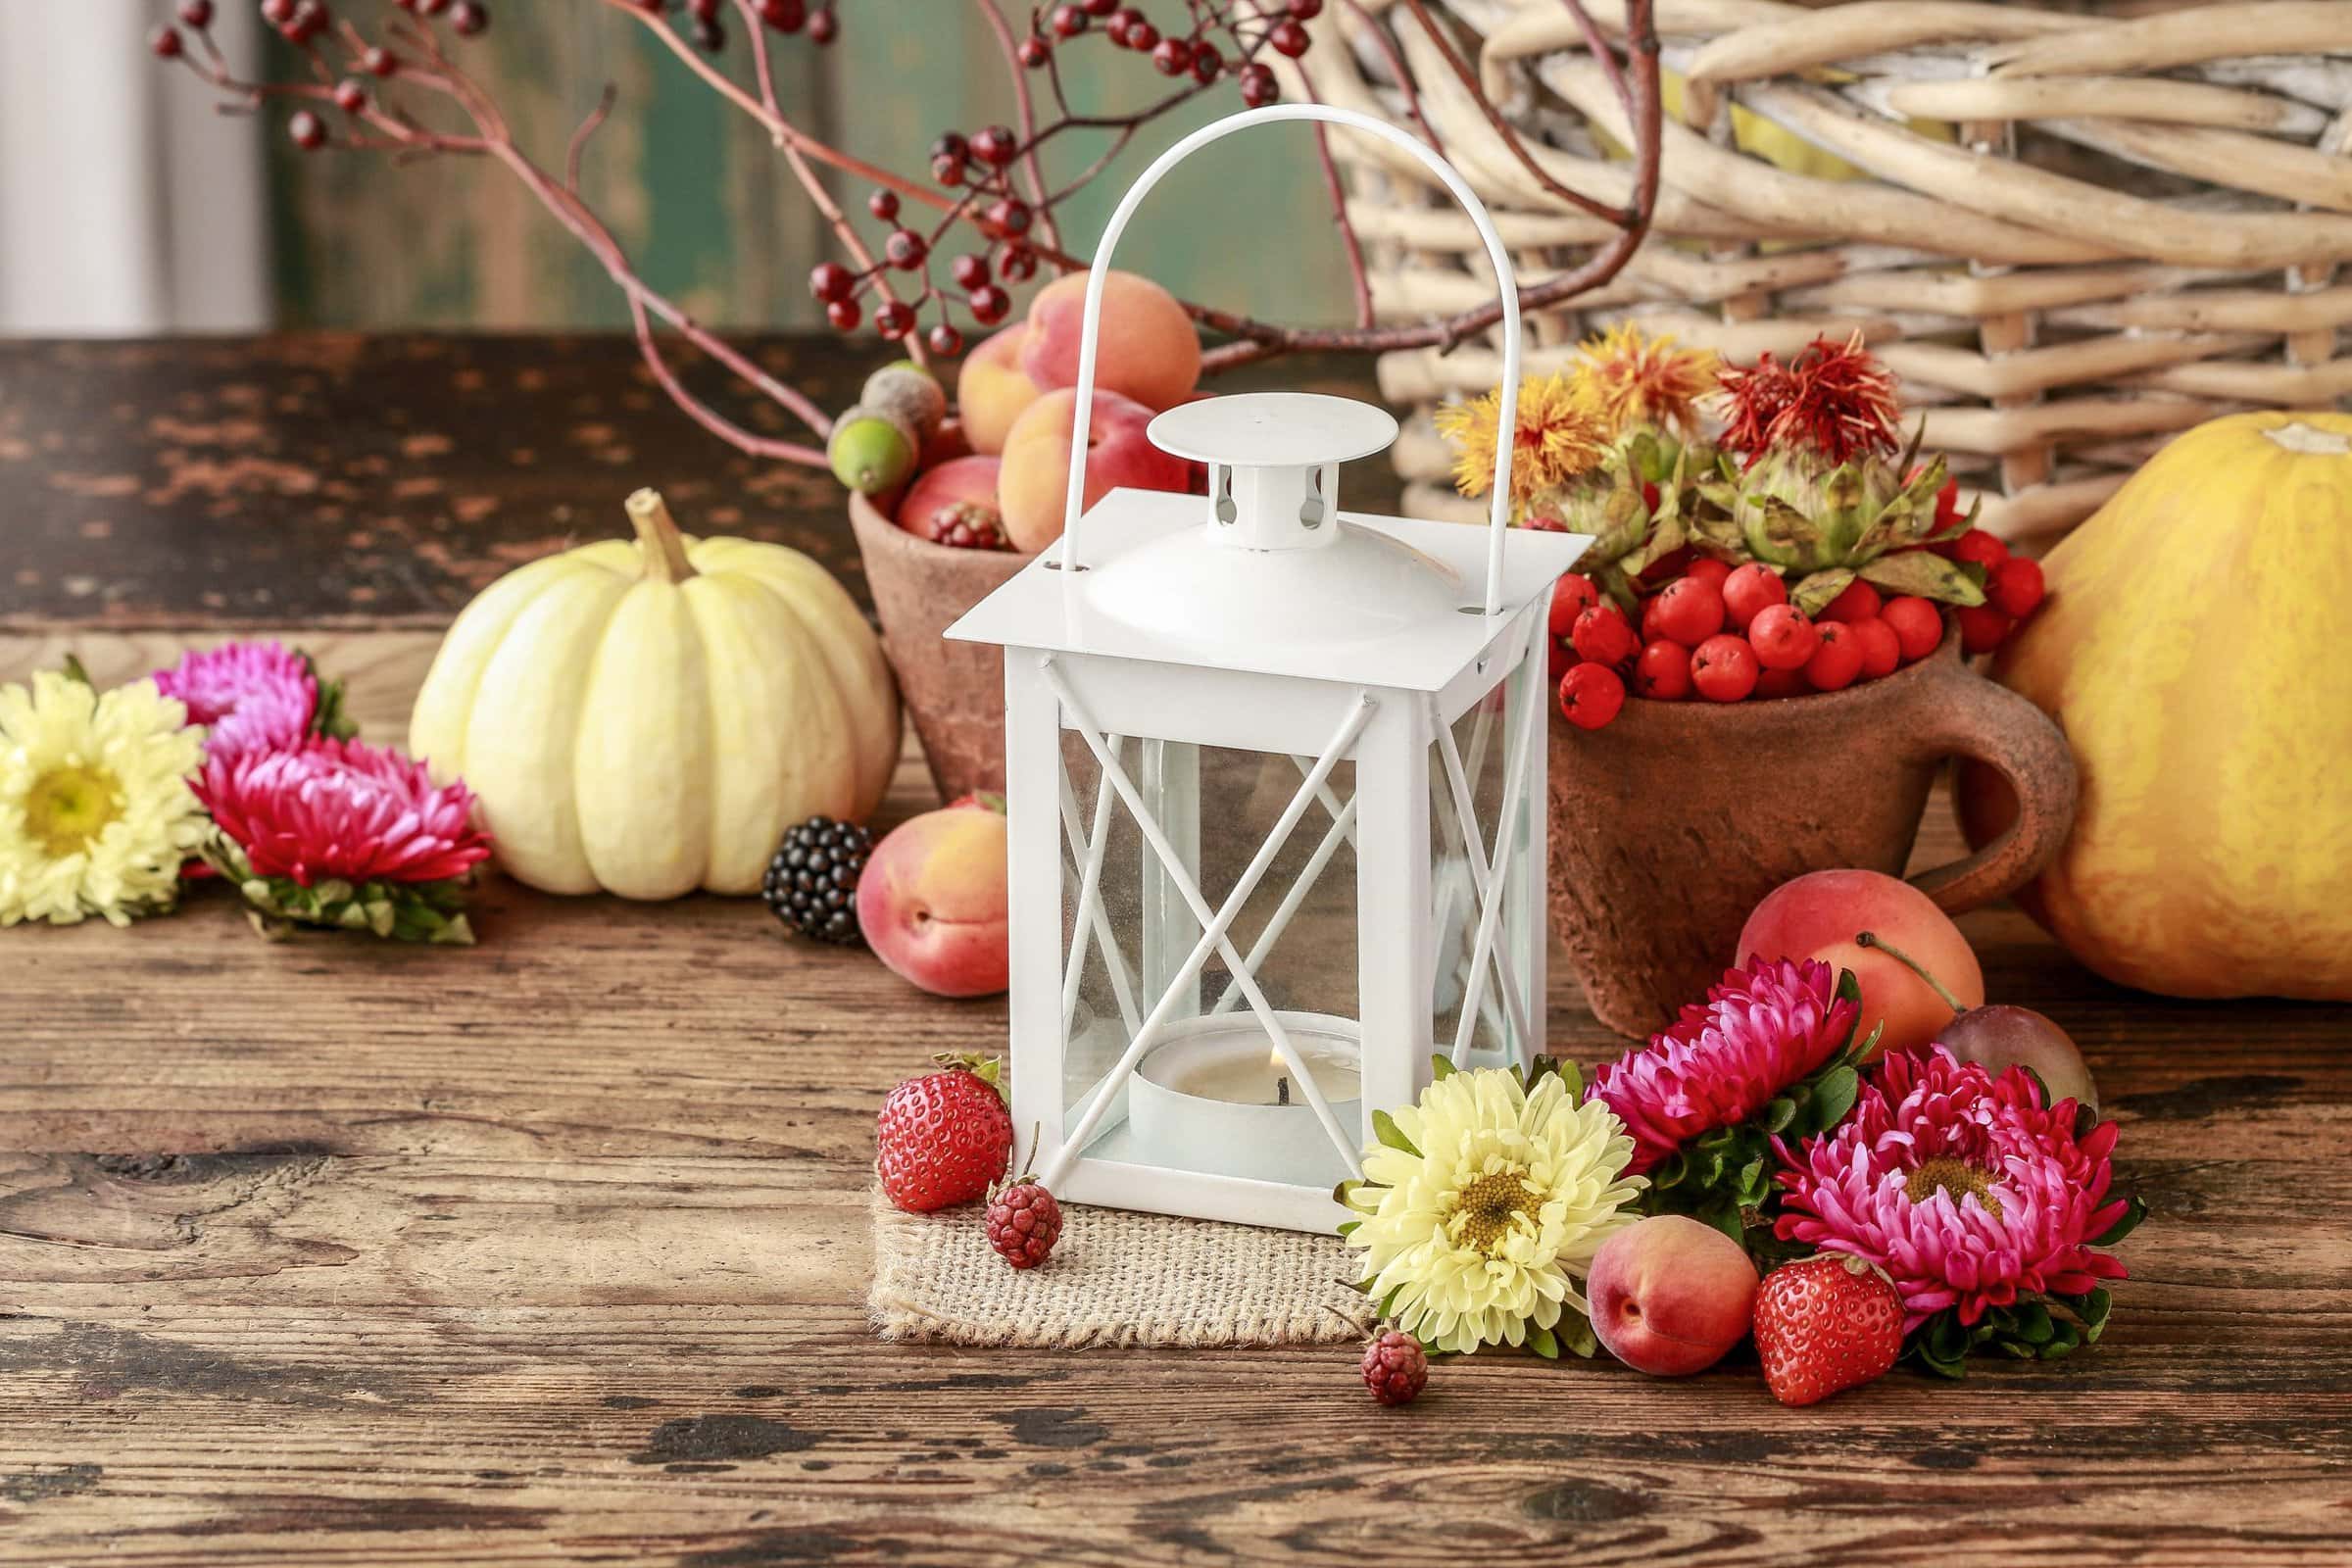  Lanterns Look Lovely as Fall Decor scaled